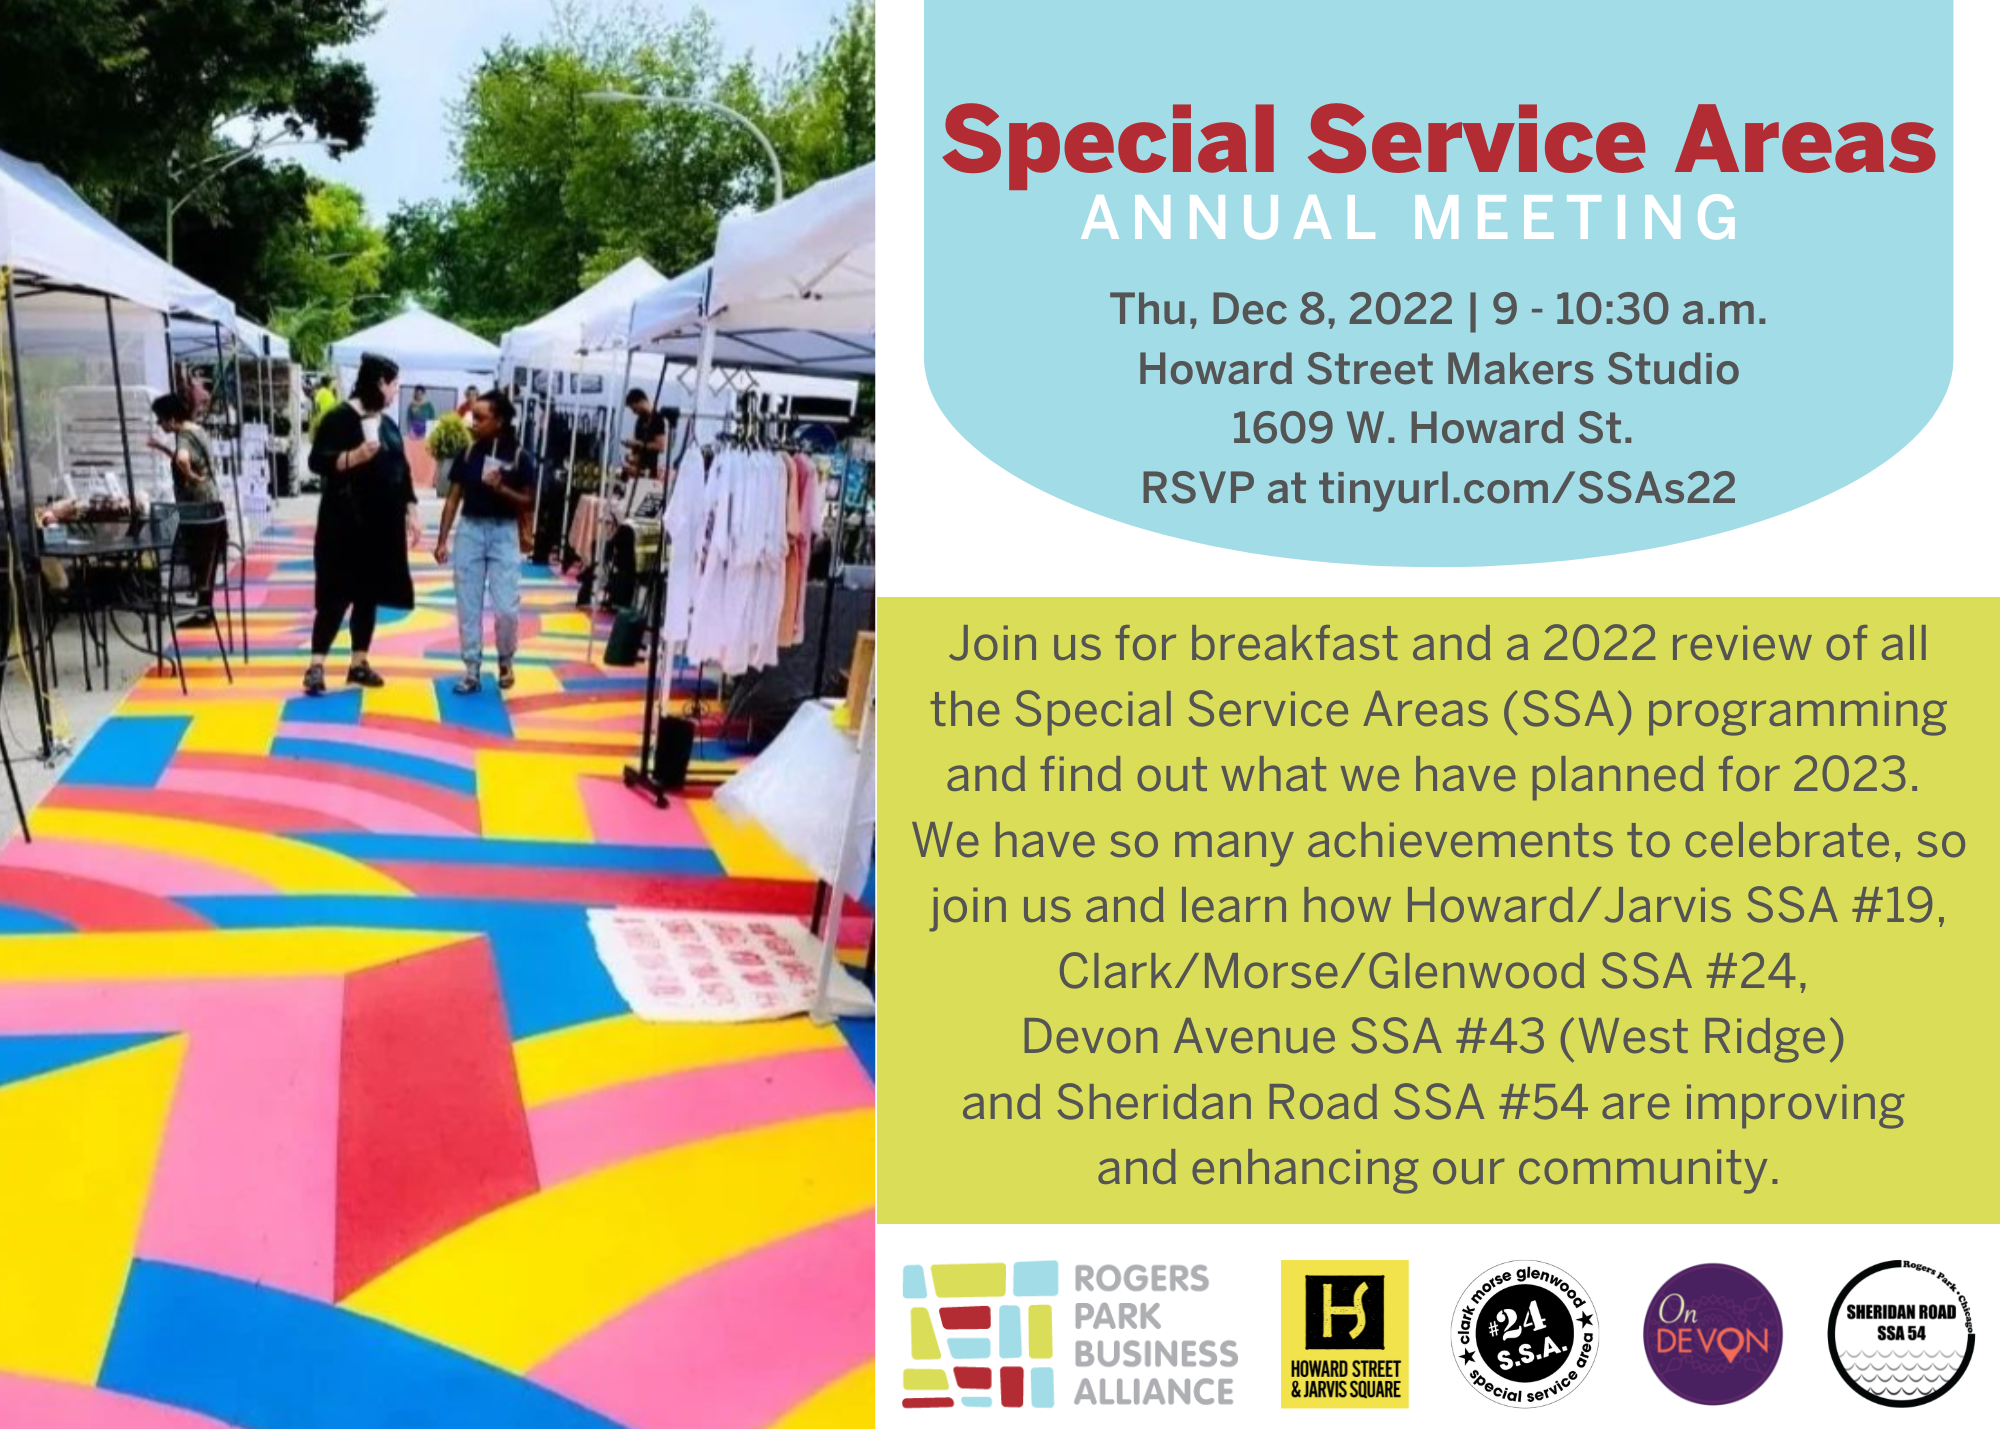 Special Service Areas Annual Meeting, rogers-park-business-alliance